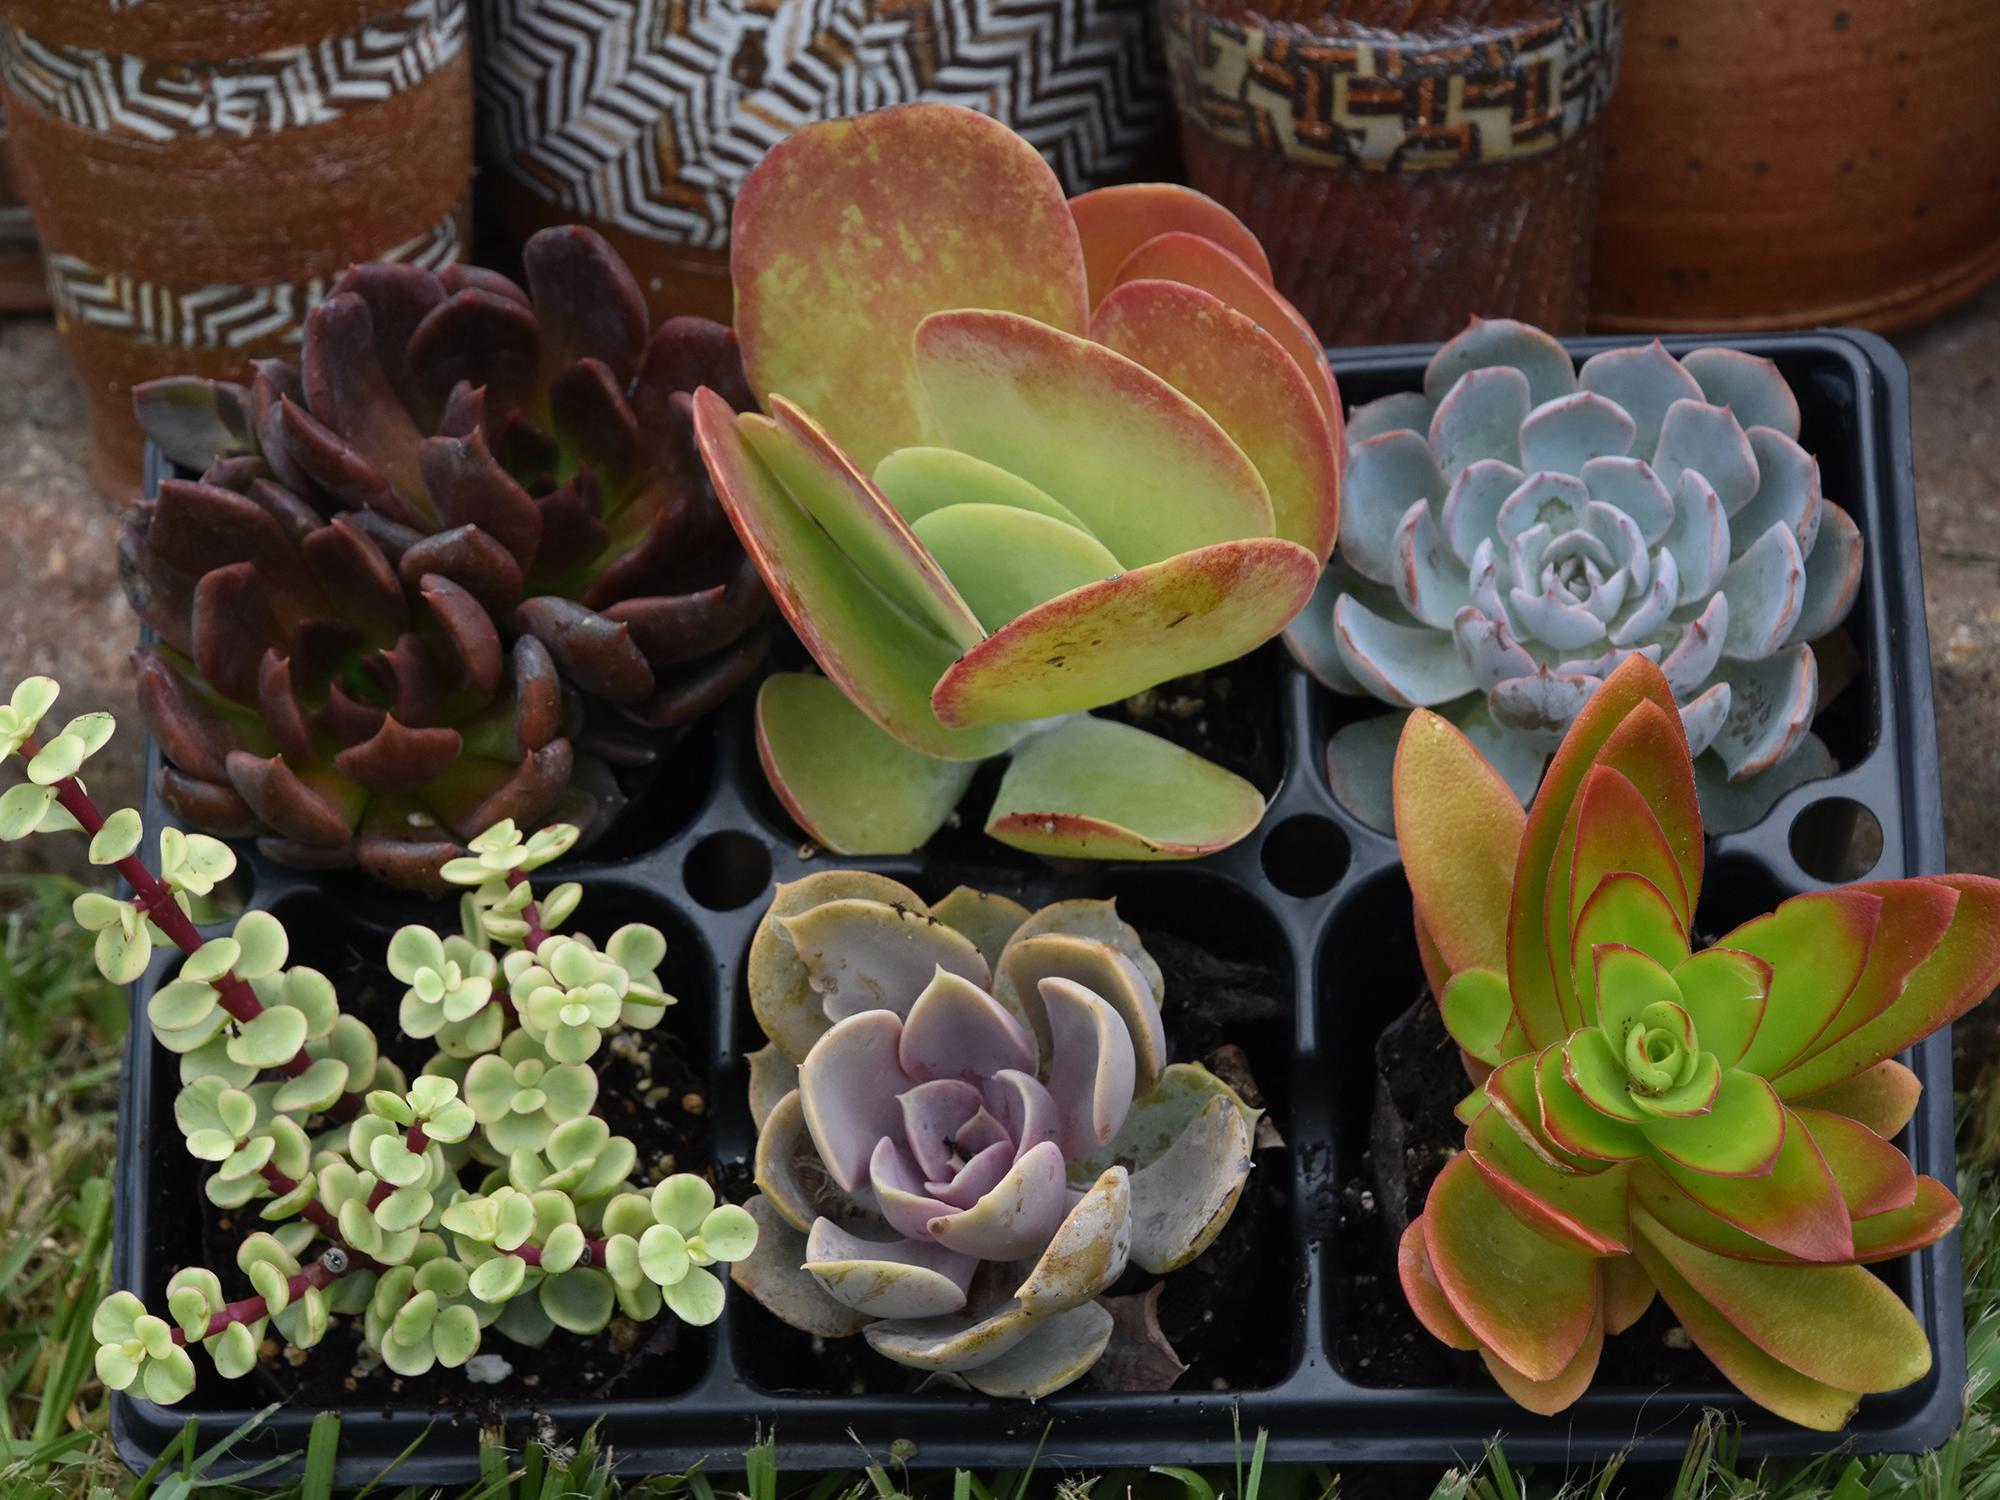 Succulents, plants with soft, juicy leaves and stems, are good choices for low-water-use gardening. (Photo by MSU Extension Service/Gary Bachman)